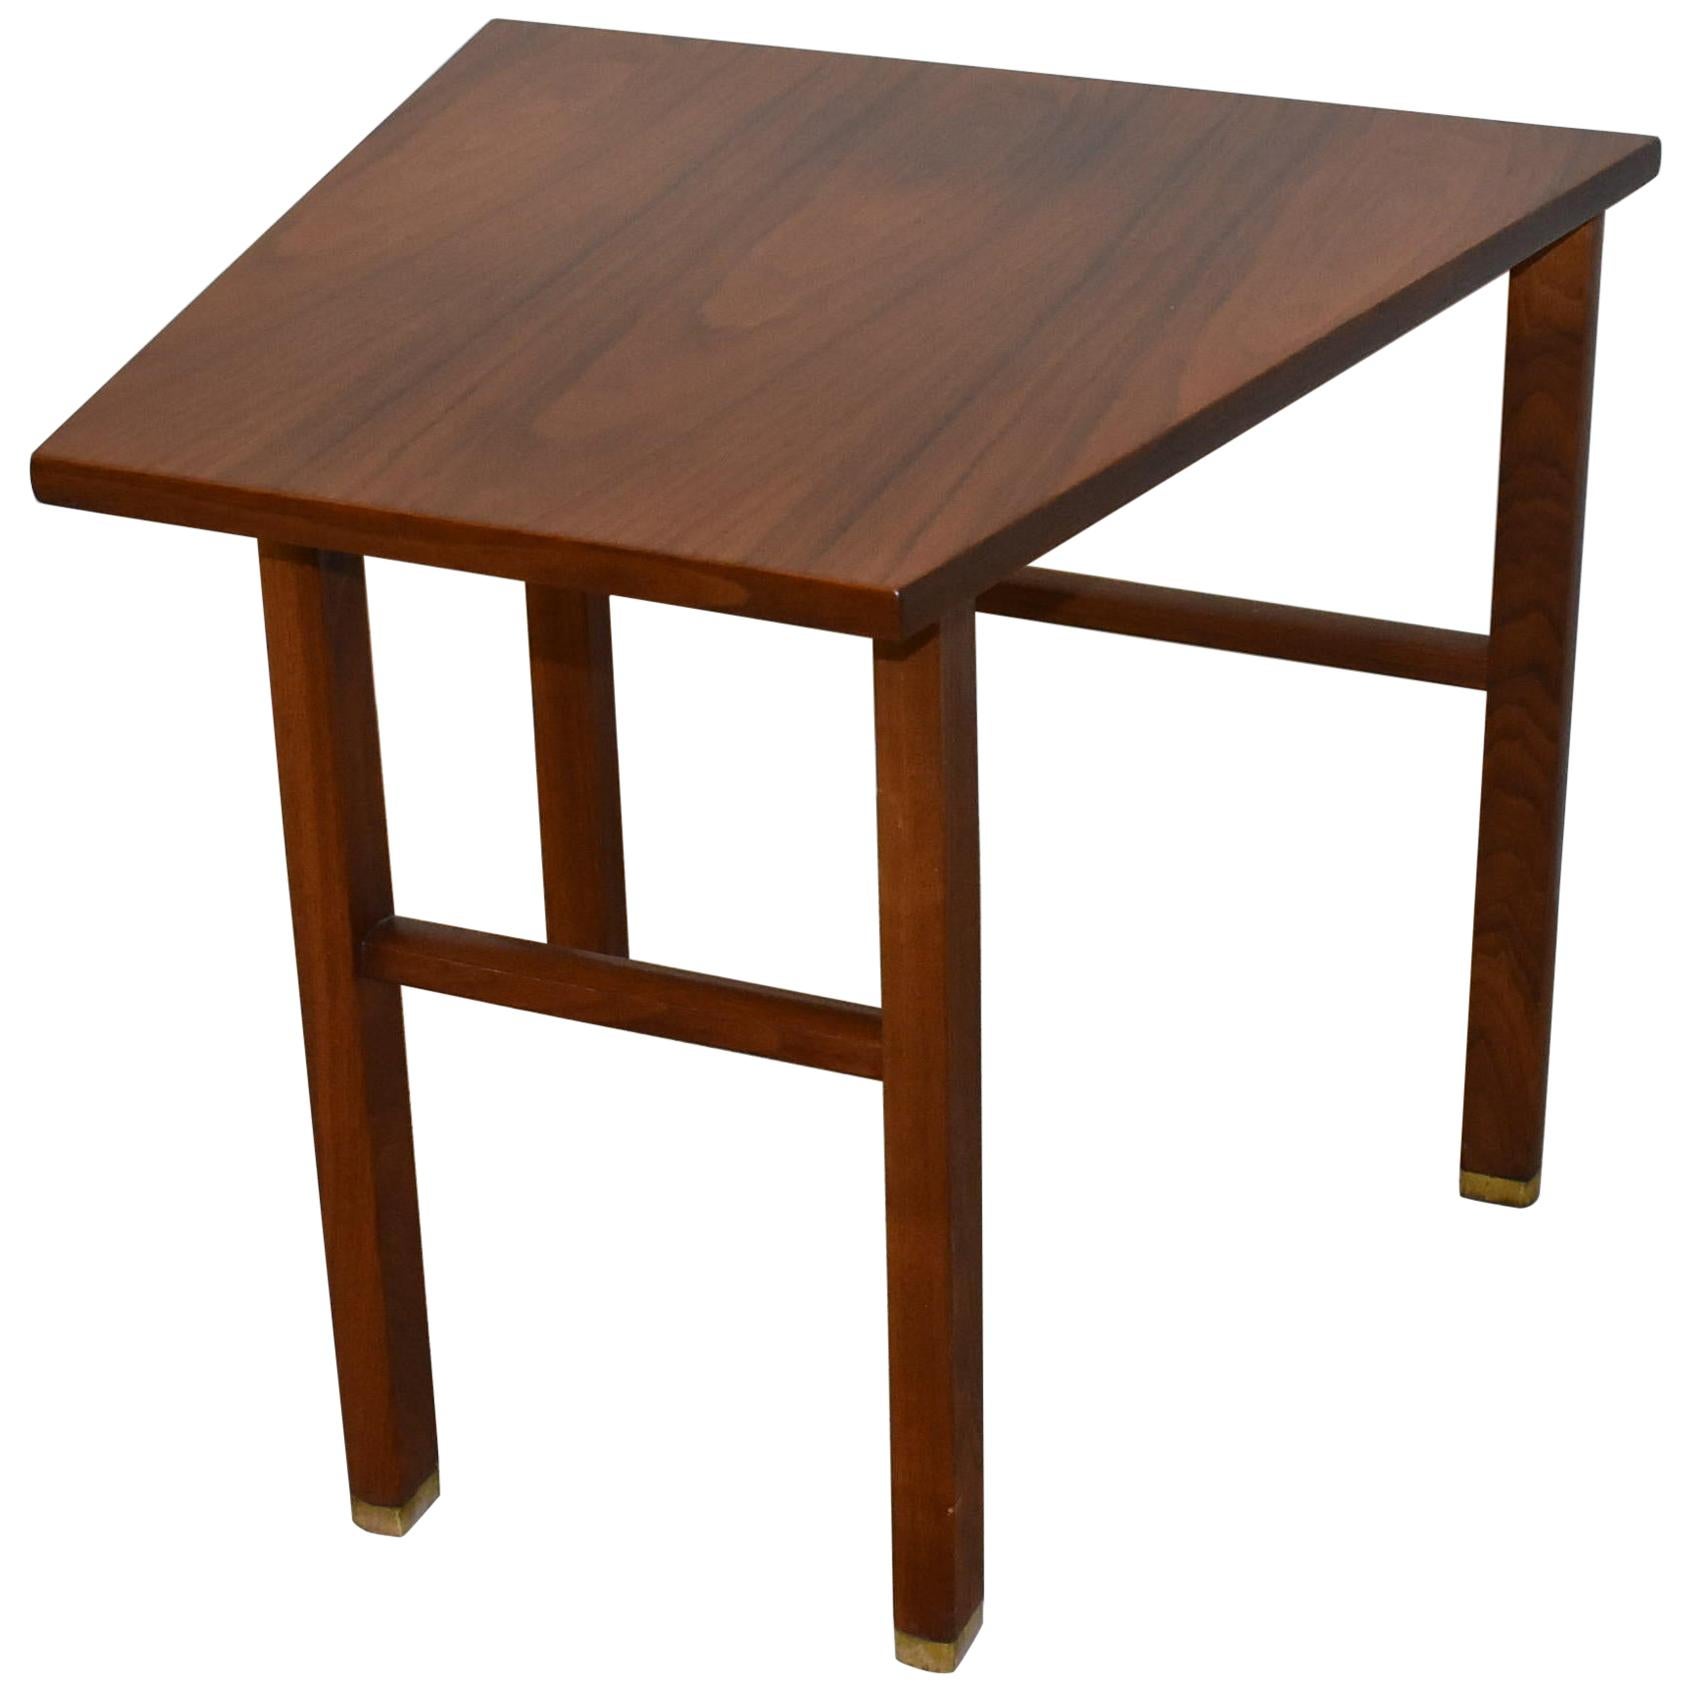 Walnut Cantilever Top Wedge Table Designed by Edward Wormley for Dunbar